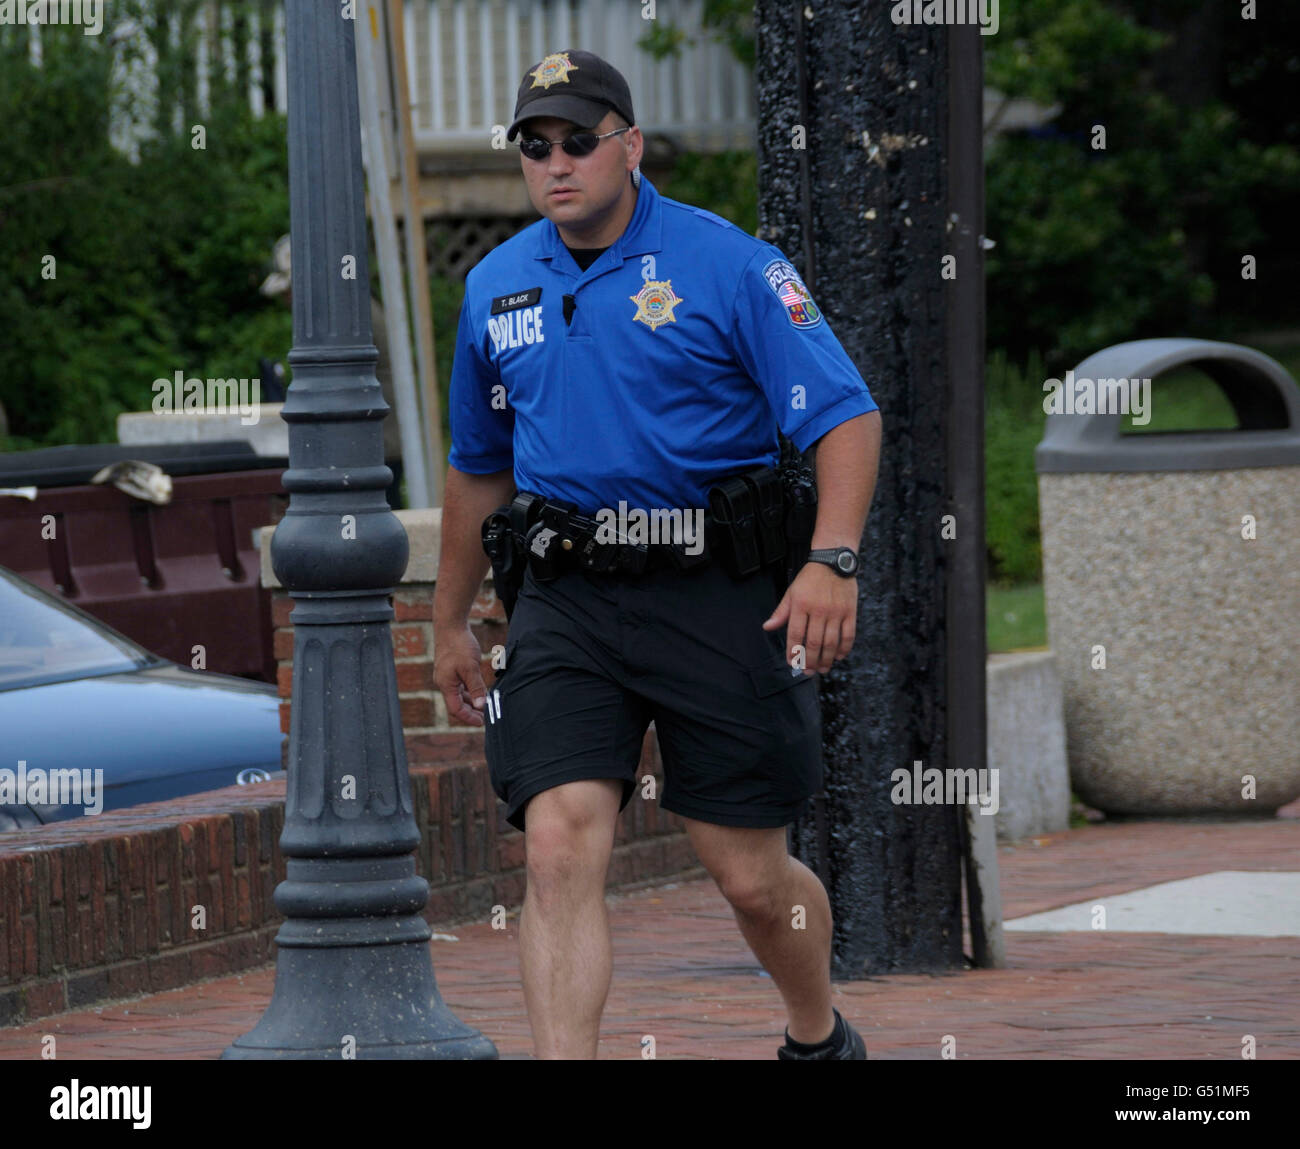 Police Officer On Foot Patrol Stock Photo Alamy